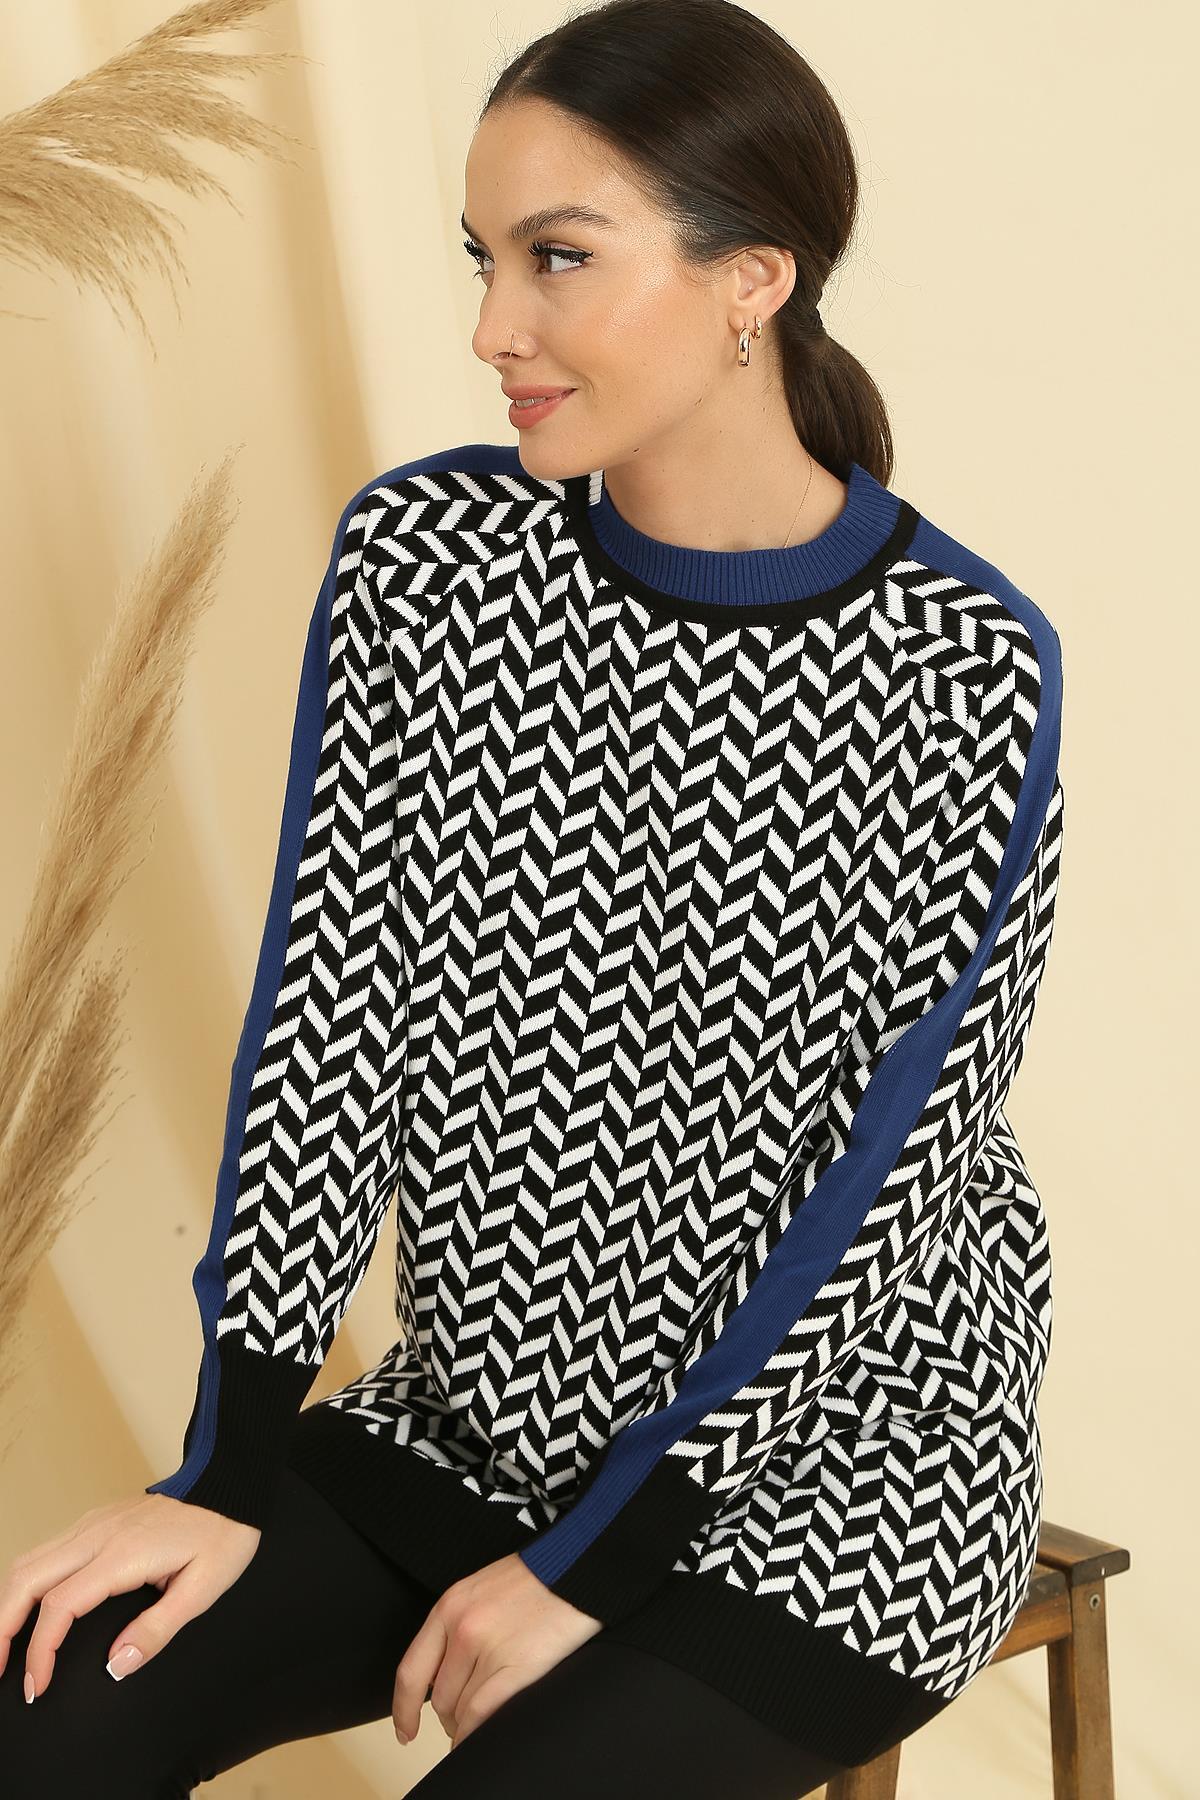 Levně By Saygı Zigzag Pattern Collar And Sleeve Ends Striped Comfort Fit Knitwear Tunic